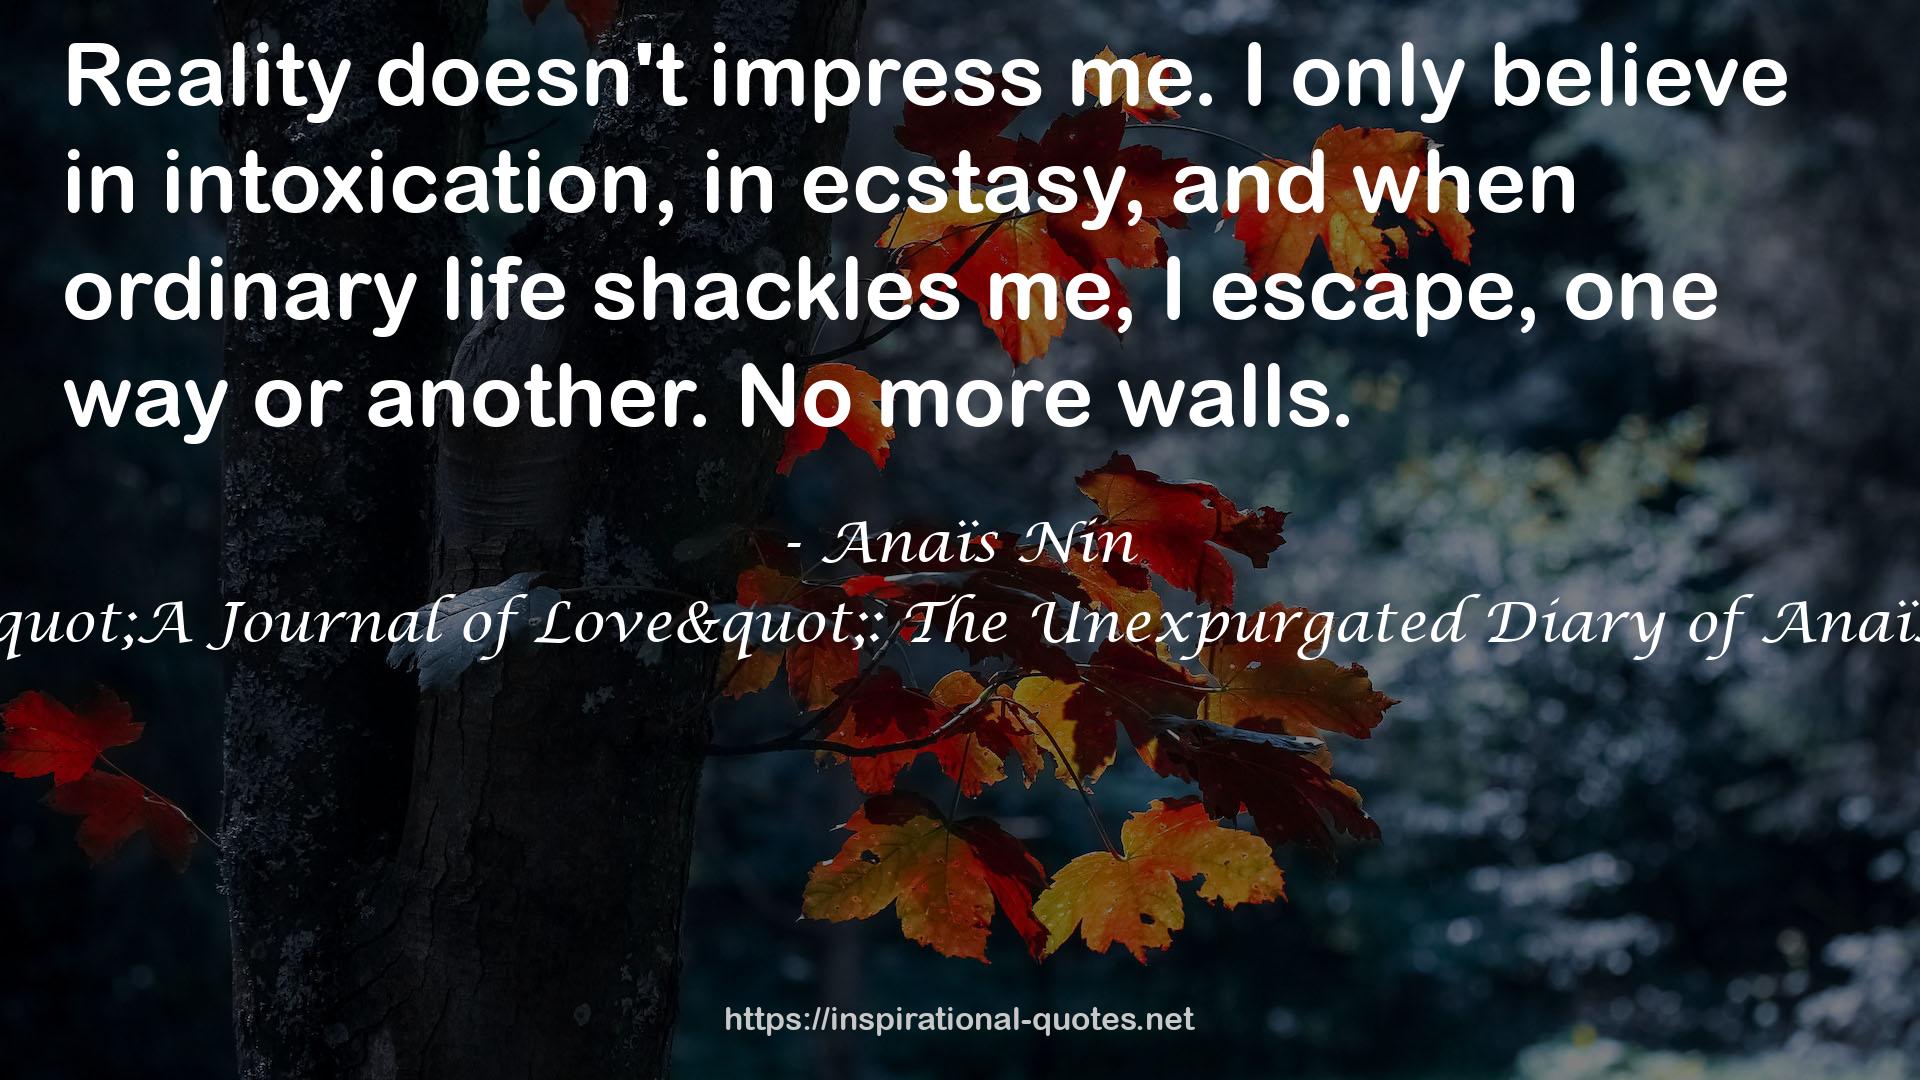 Incest: From "A Journal of Love": The Unexpurgated Diary of Anaïs Nin, 1932-1934 QUOTES